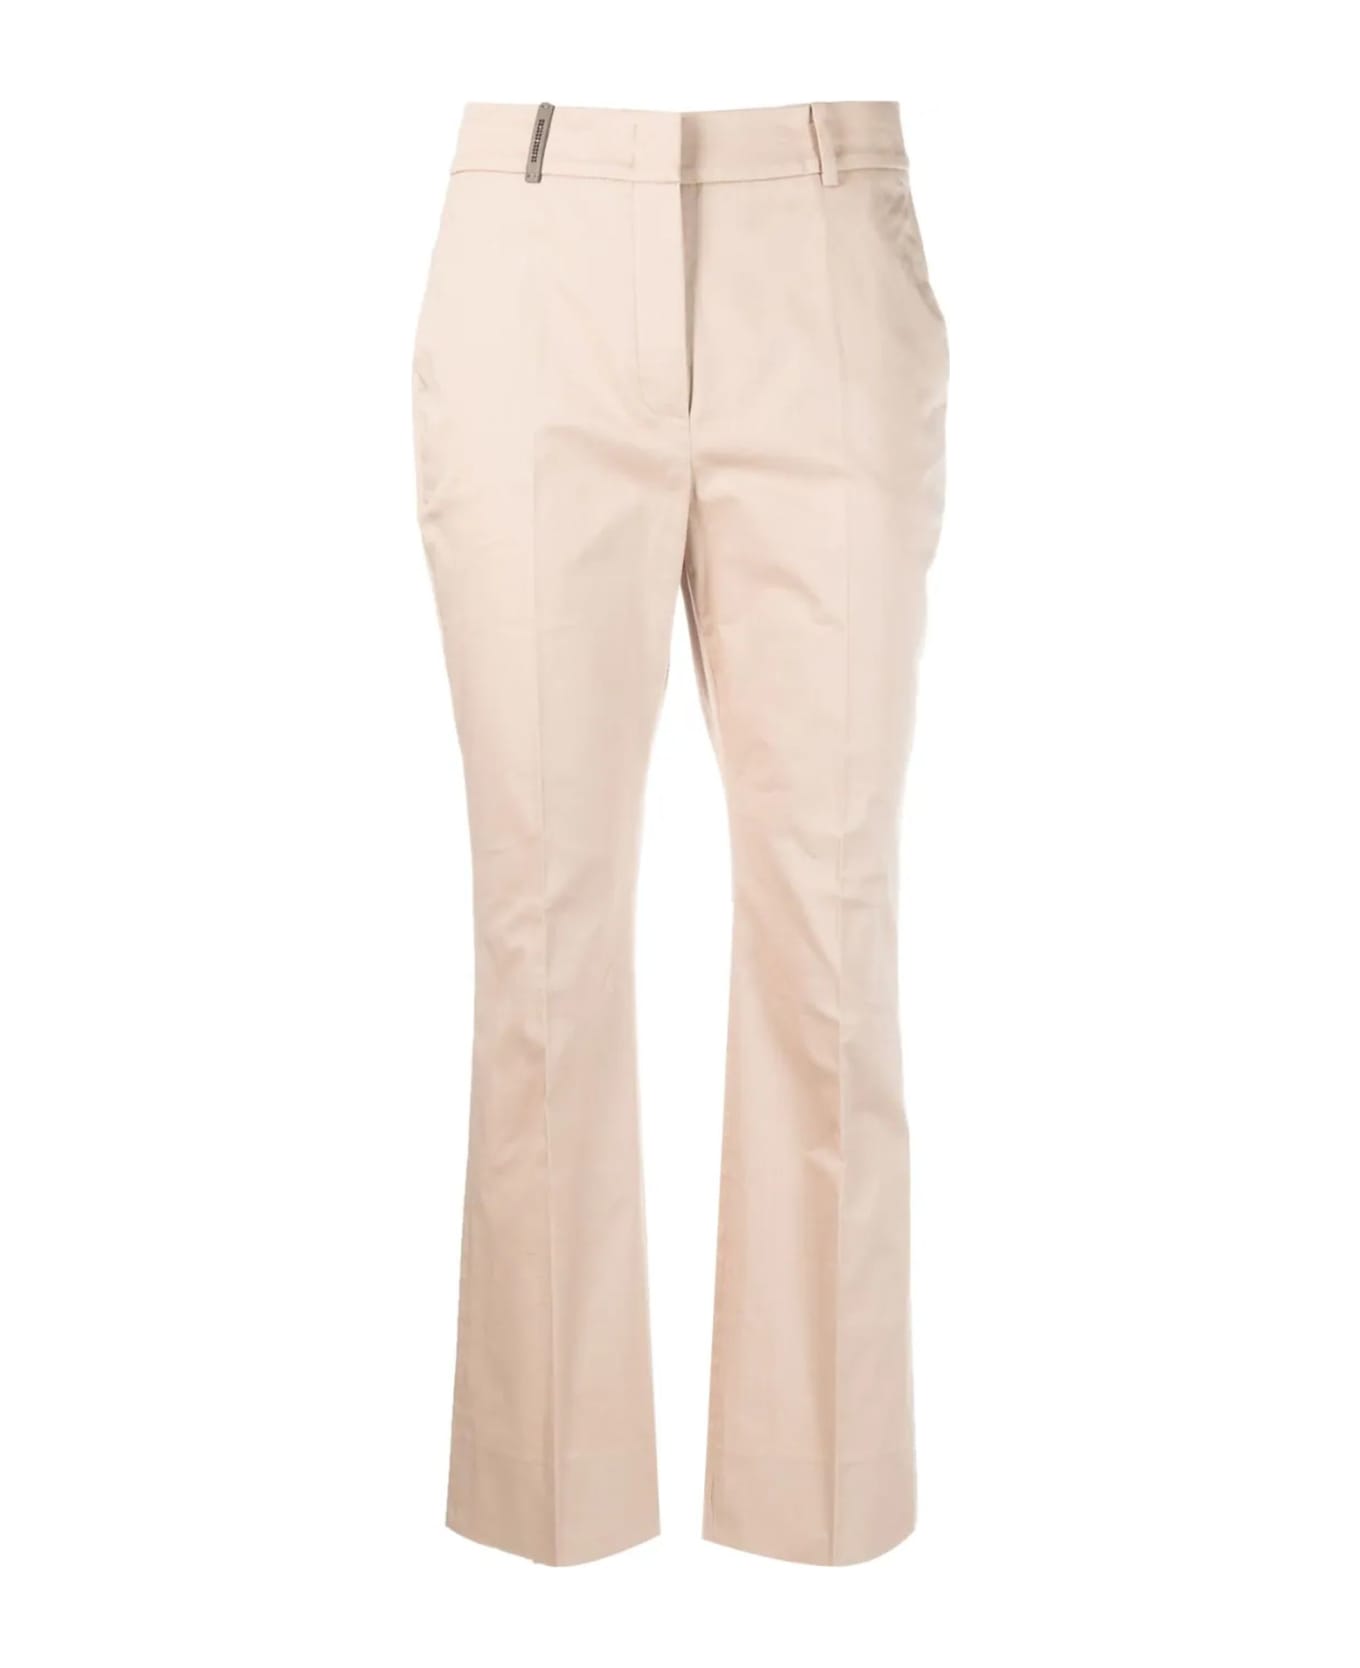 Peserico Mid-rise Tailored Trousers Beige - Beige ボトムス